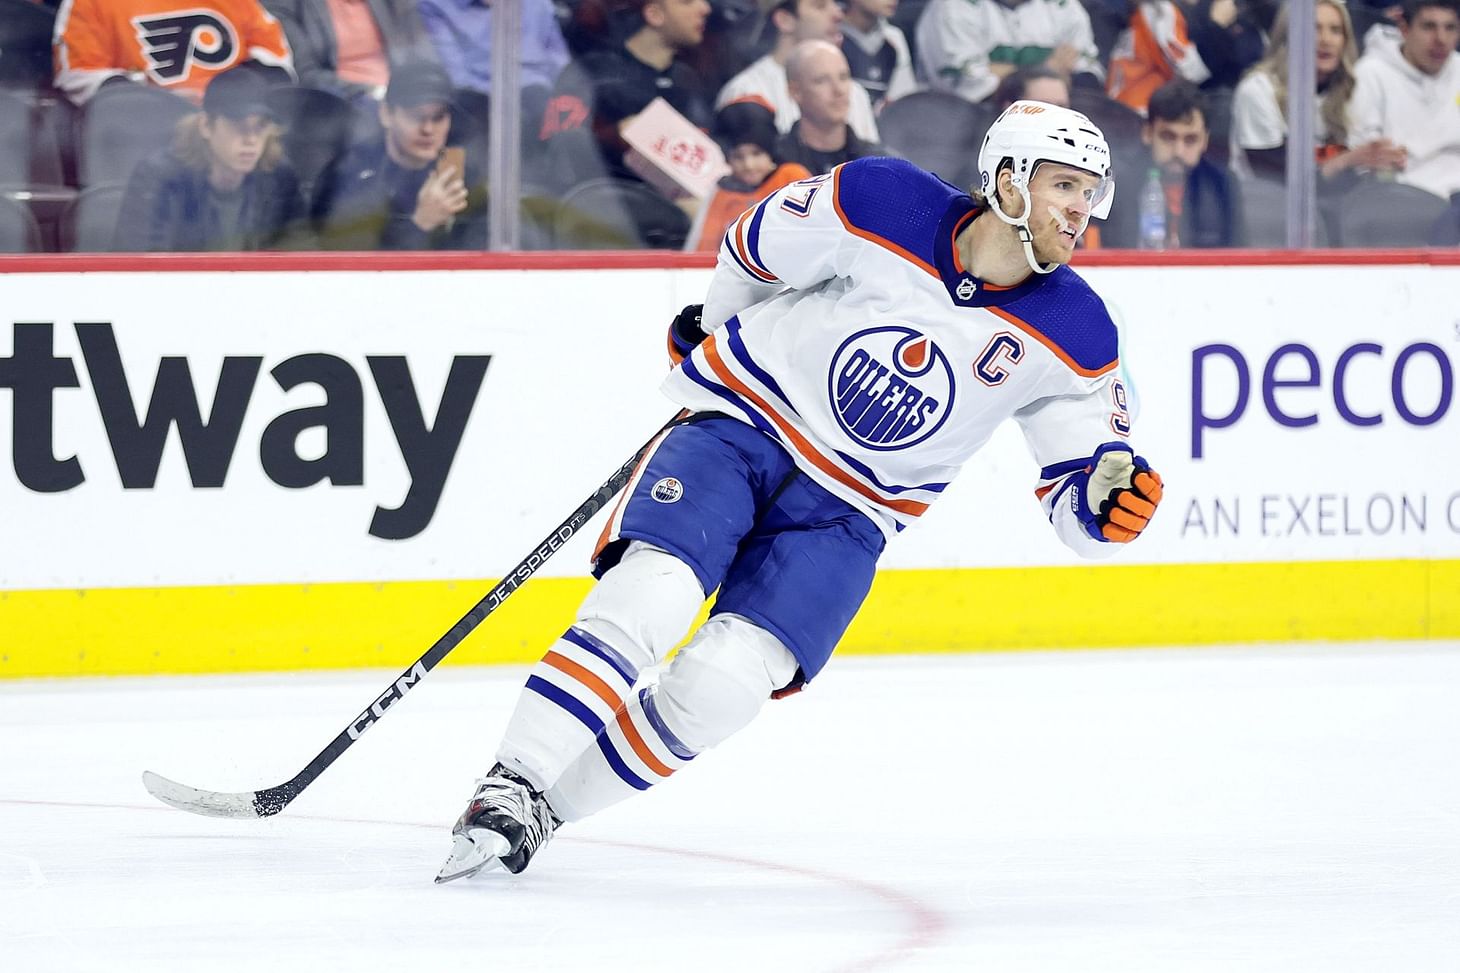 Connor McDavid sets a new personal best for points in win over Sabres